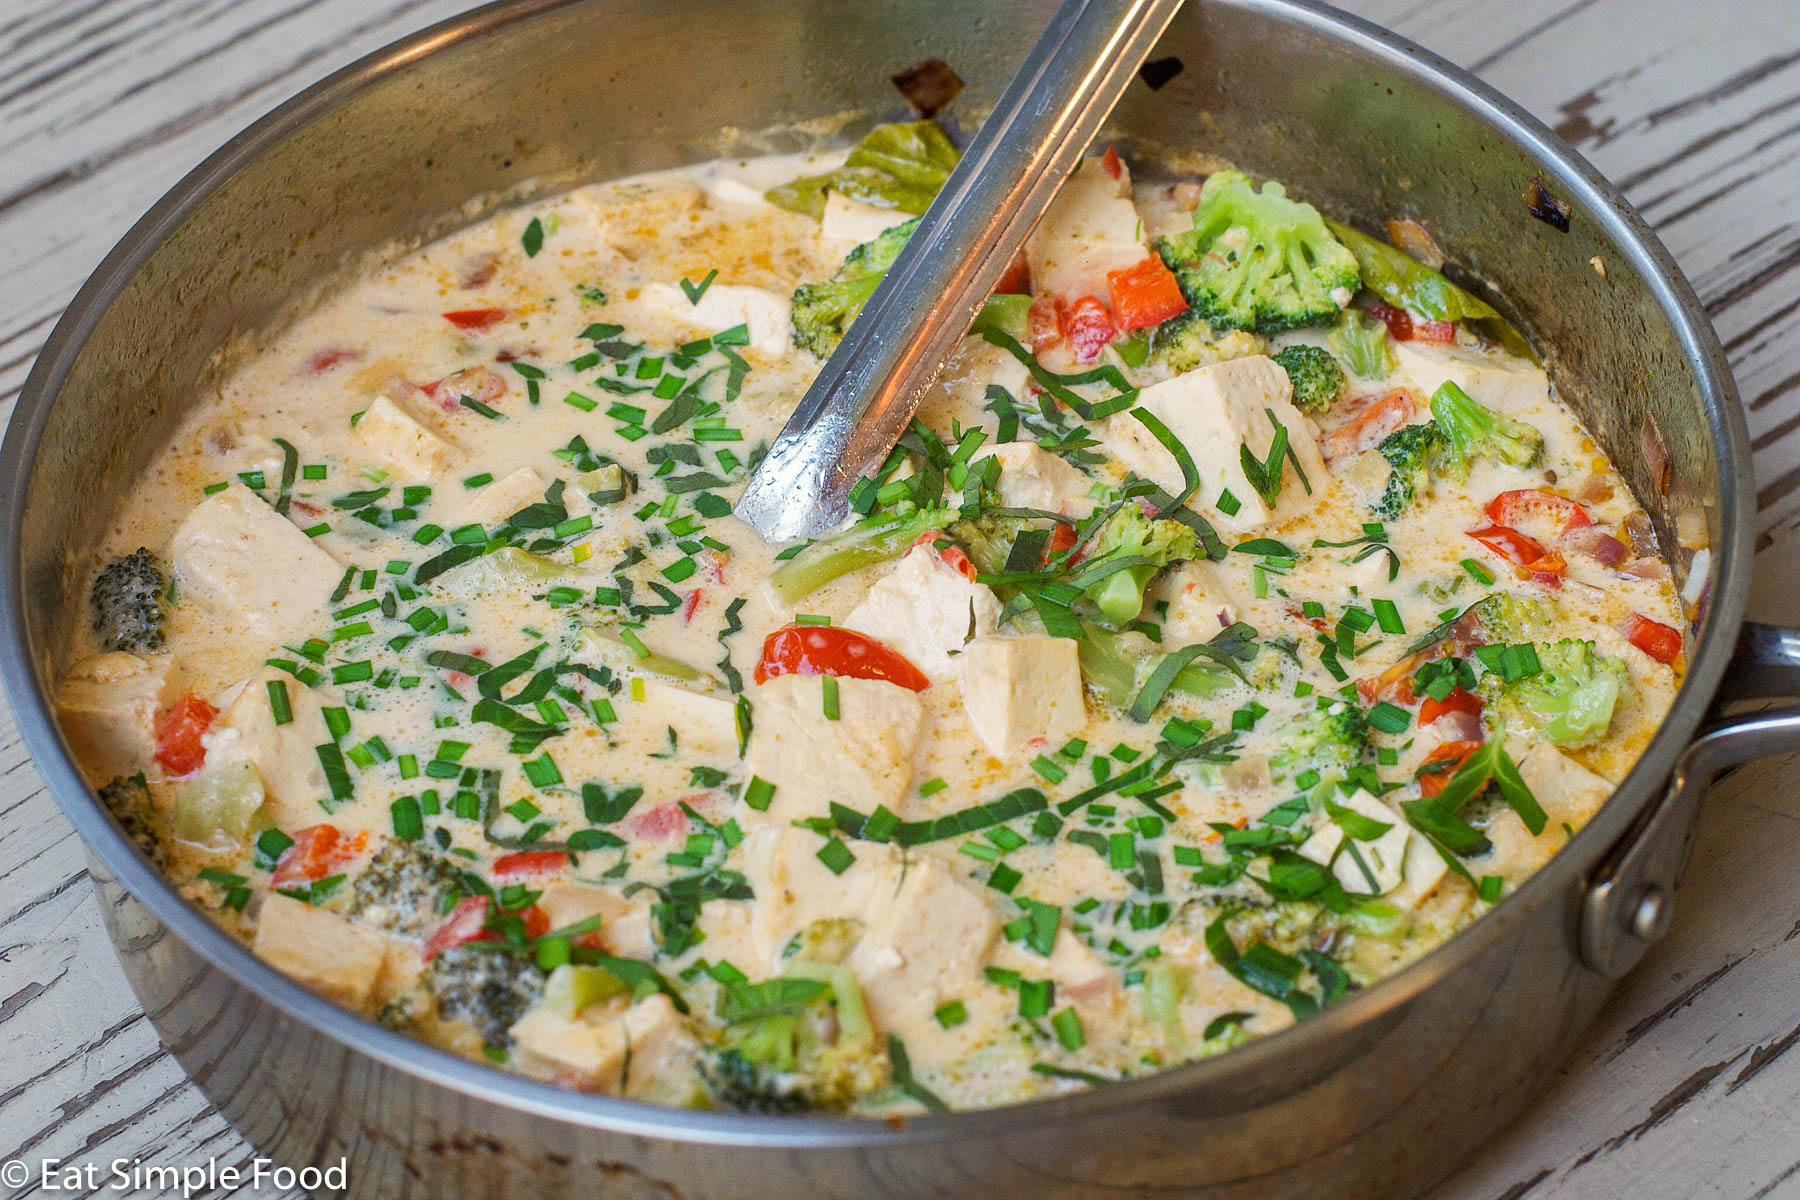 Deep Stainless steel pan filled with cubed tofu, chunked red peppers and broccoli and garnished with sliced chives and basil. Serving spoon hanging out the side. close up.